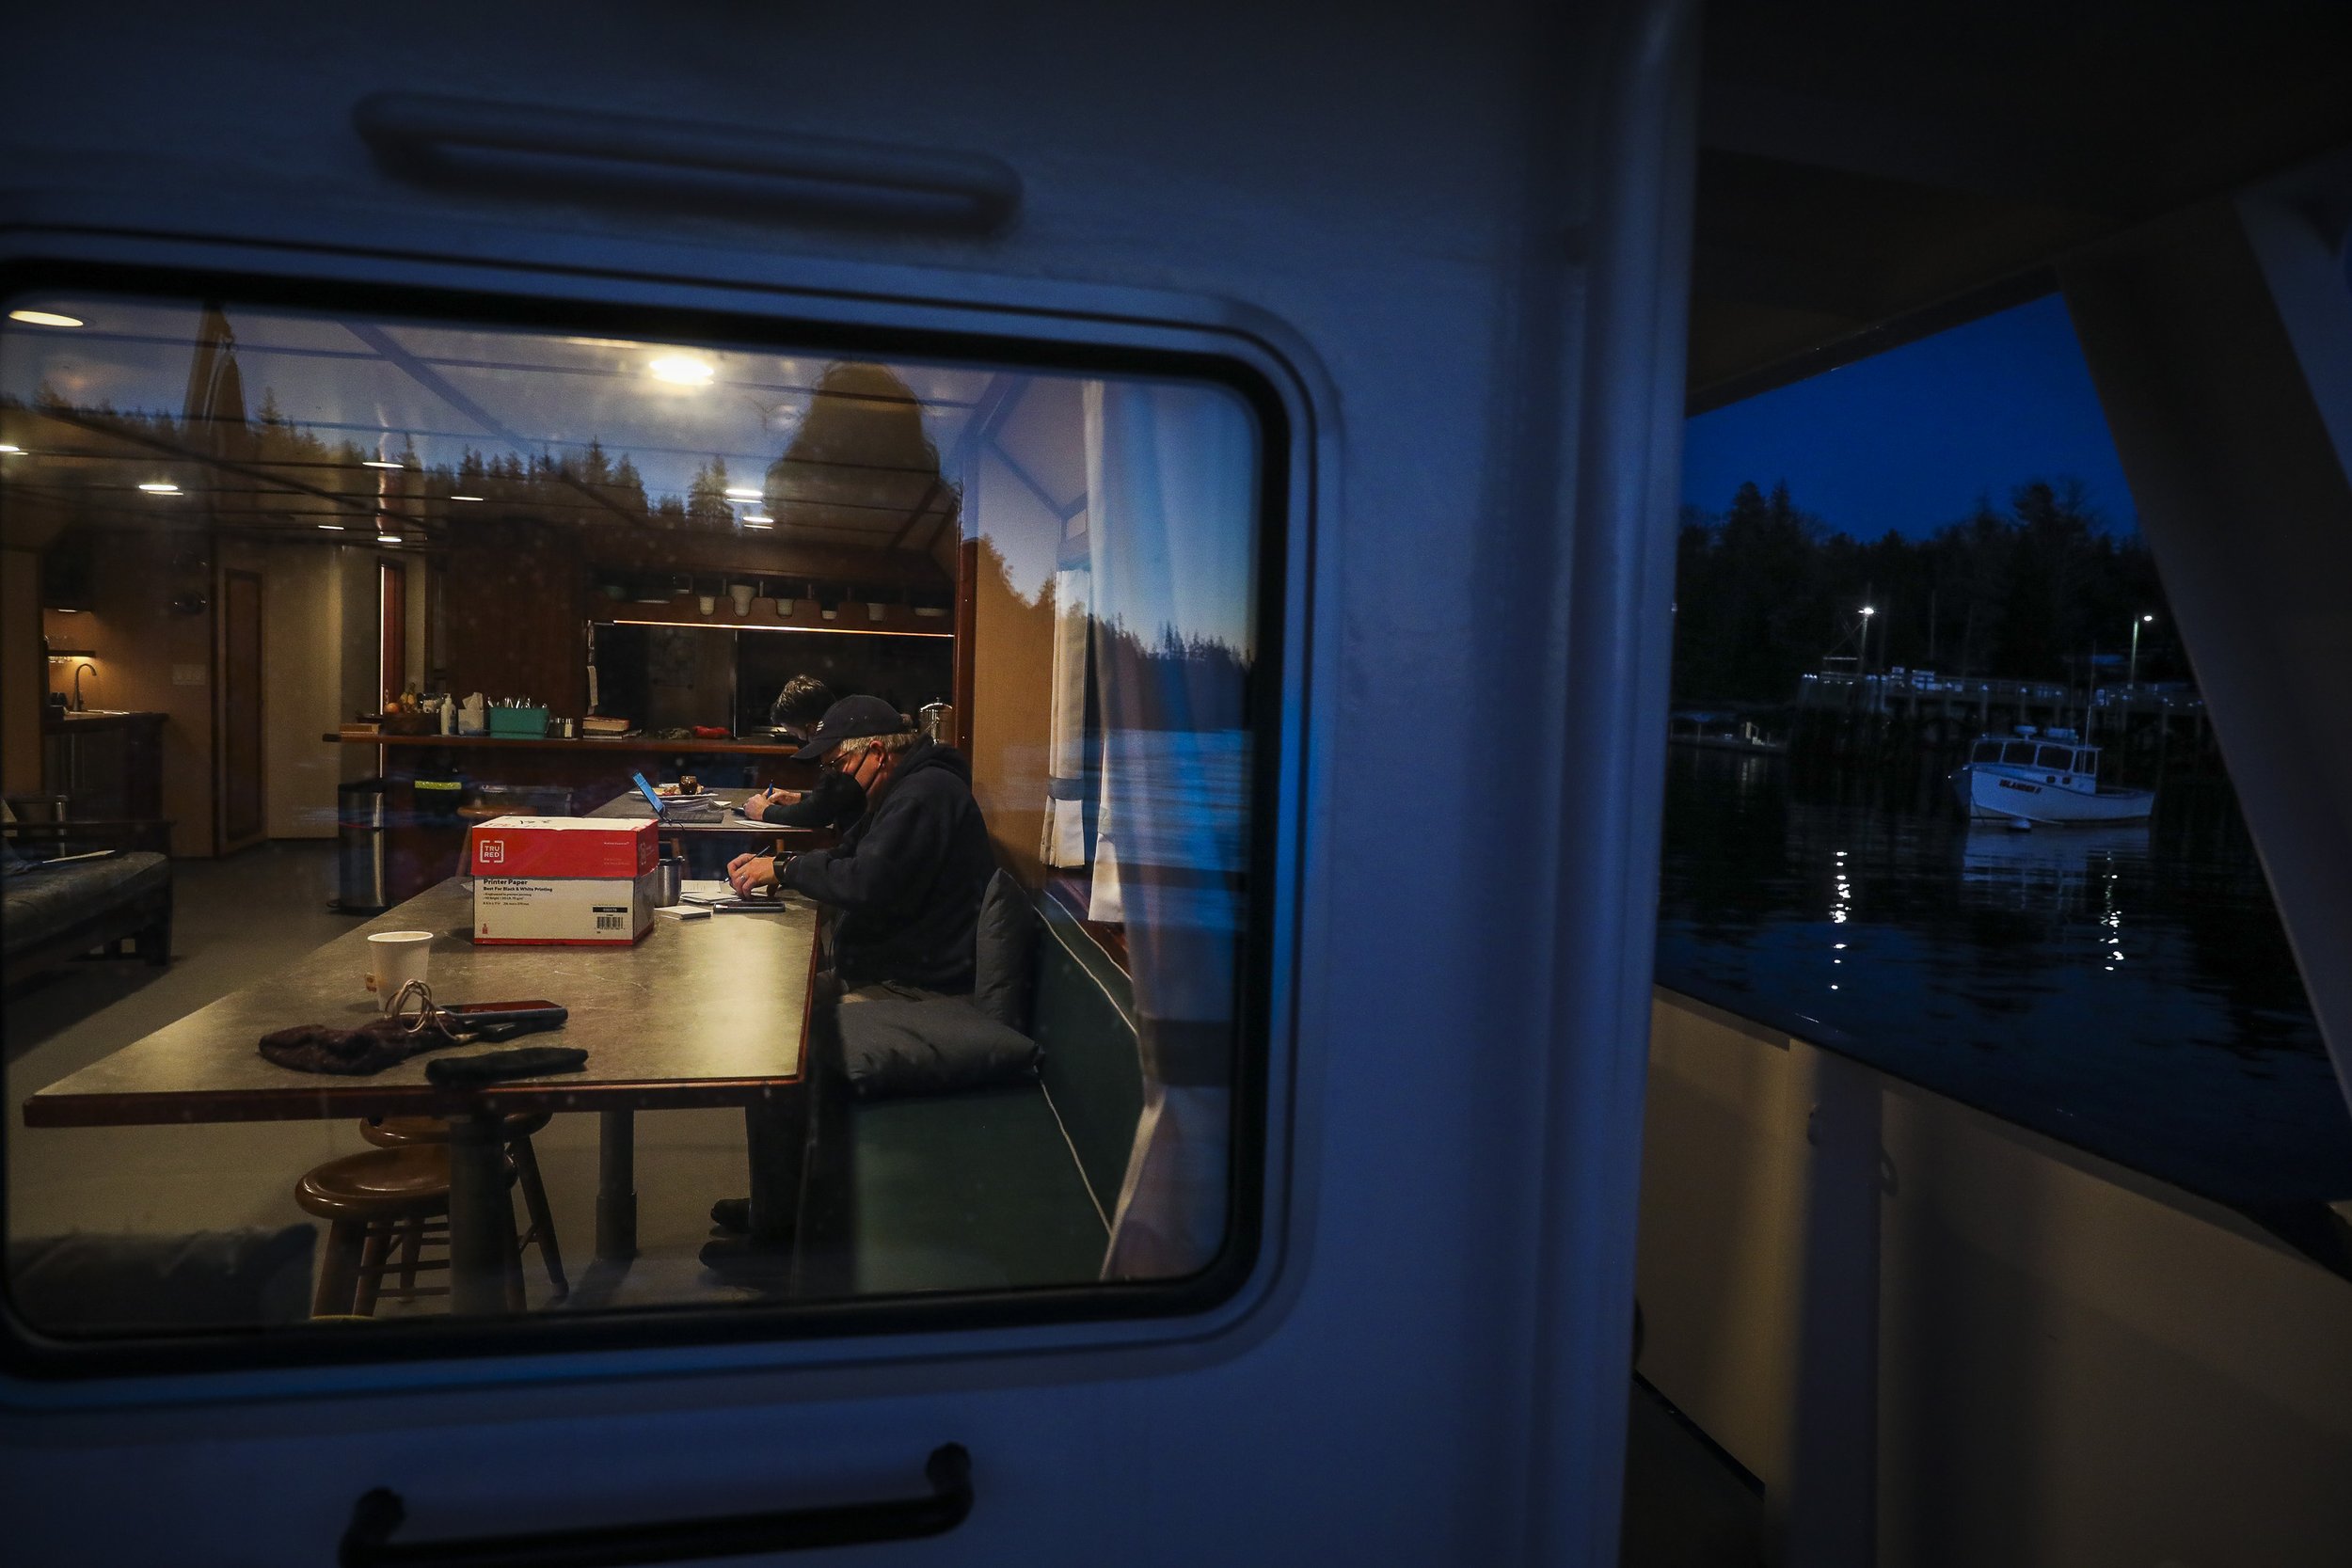  President of Seacoast Mission John Zavodny tallies the days vaccine totals as the Sunbeam arrives to Isle au Haut Harbor just before dark. After docking, the crew plans to sleep the night on the boat before beginning vaccinations on the island early